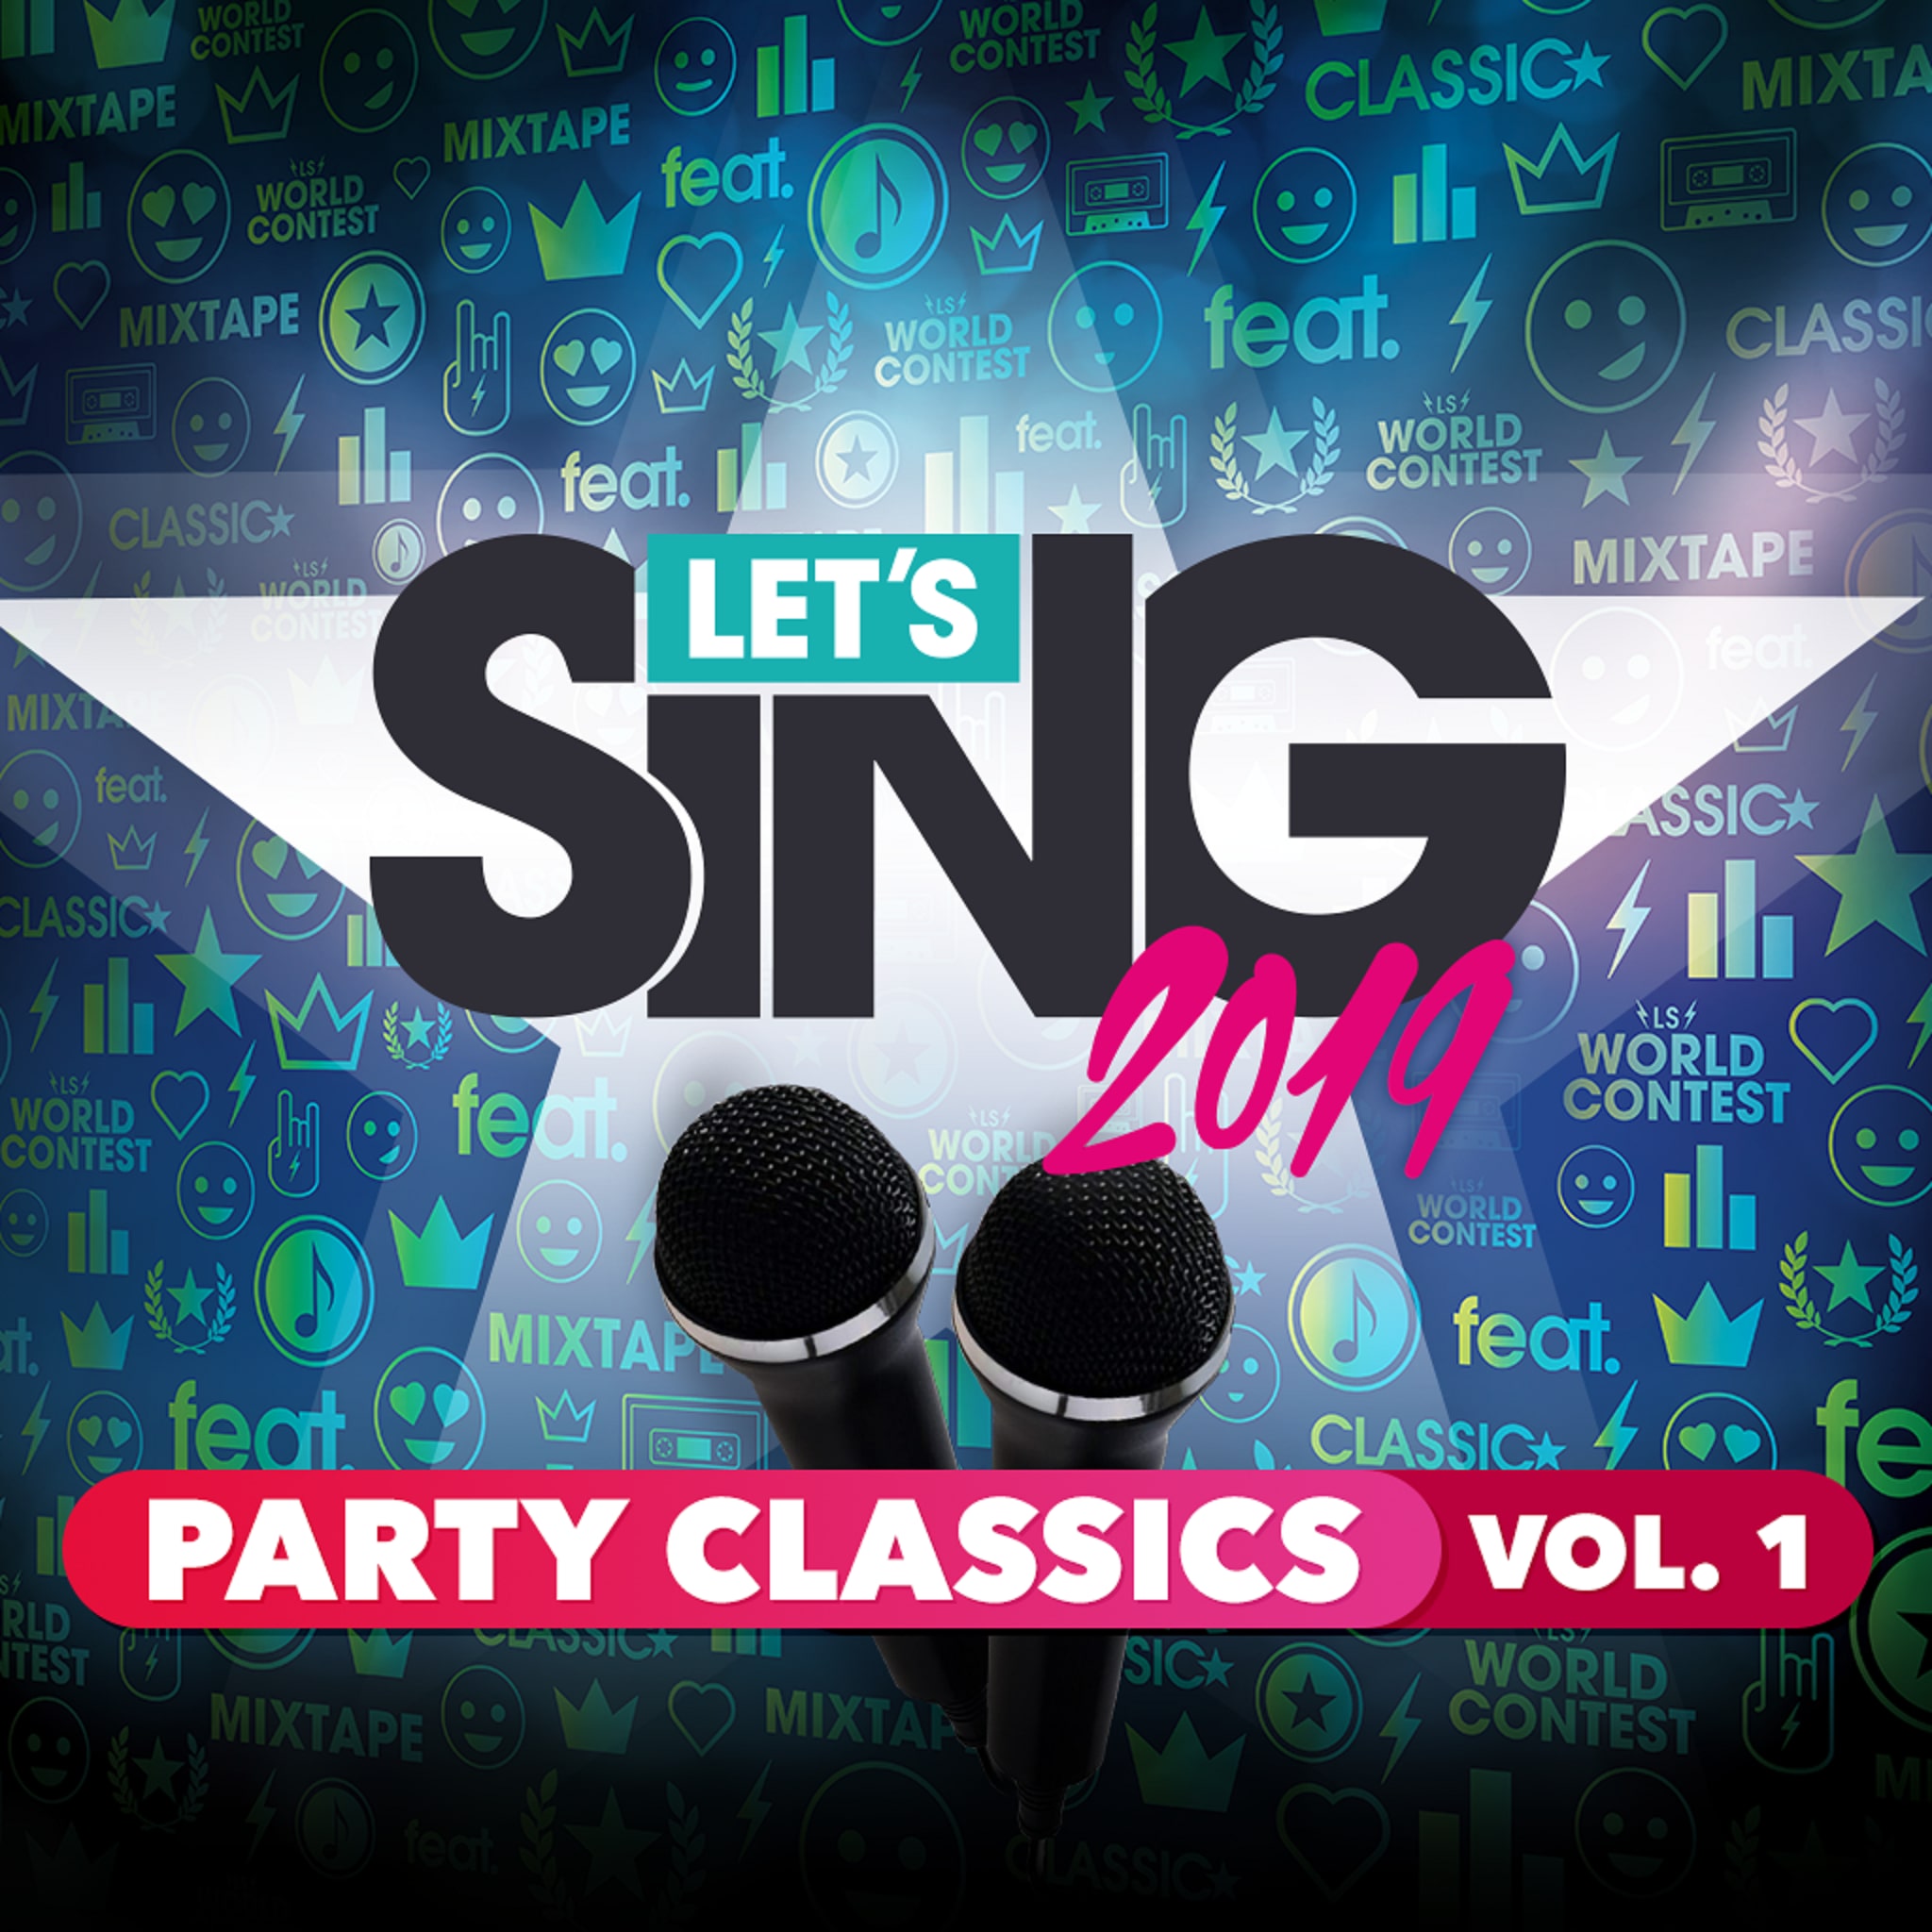 Let's Sing 2019 - Party Classics Vol. 1  Song Pack